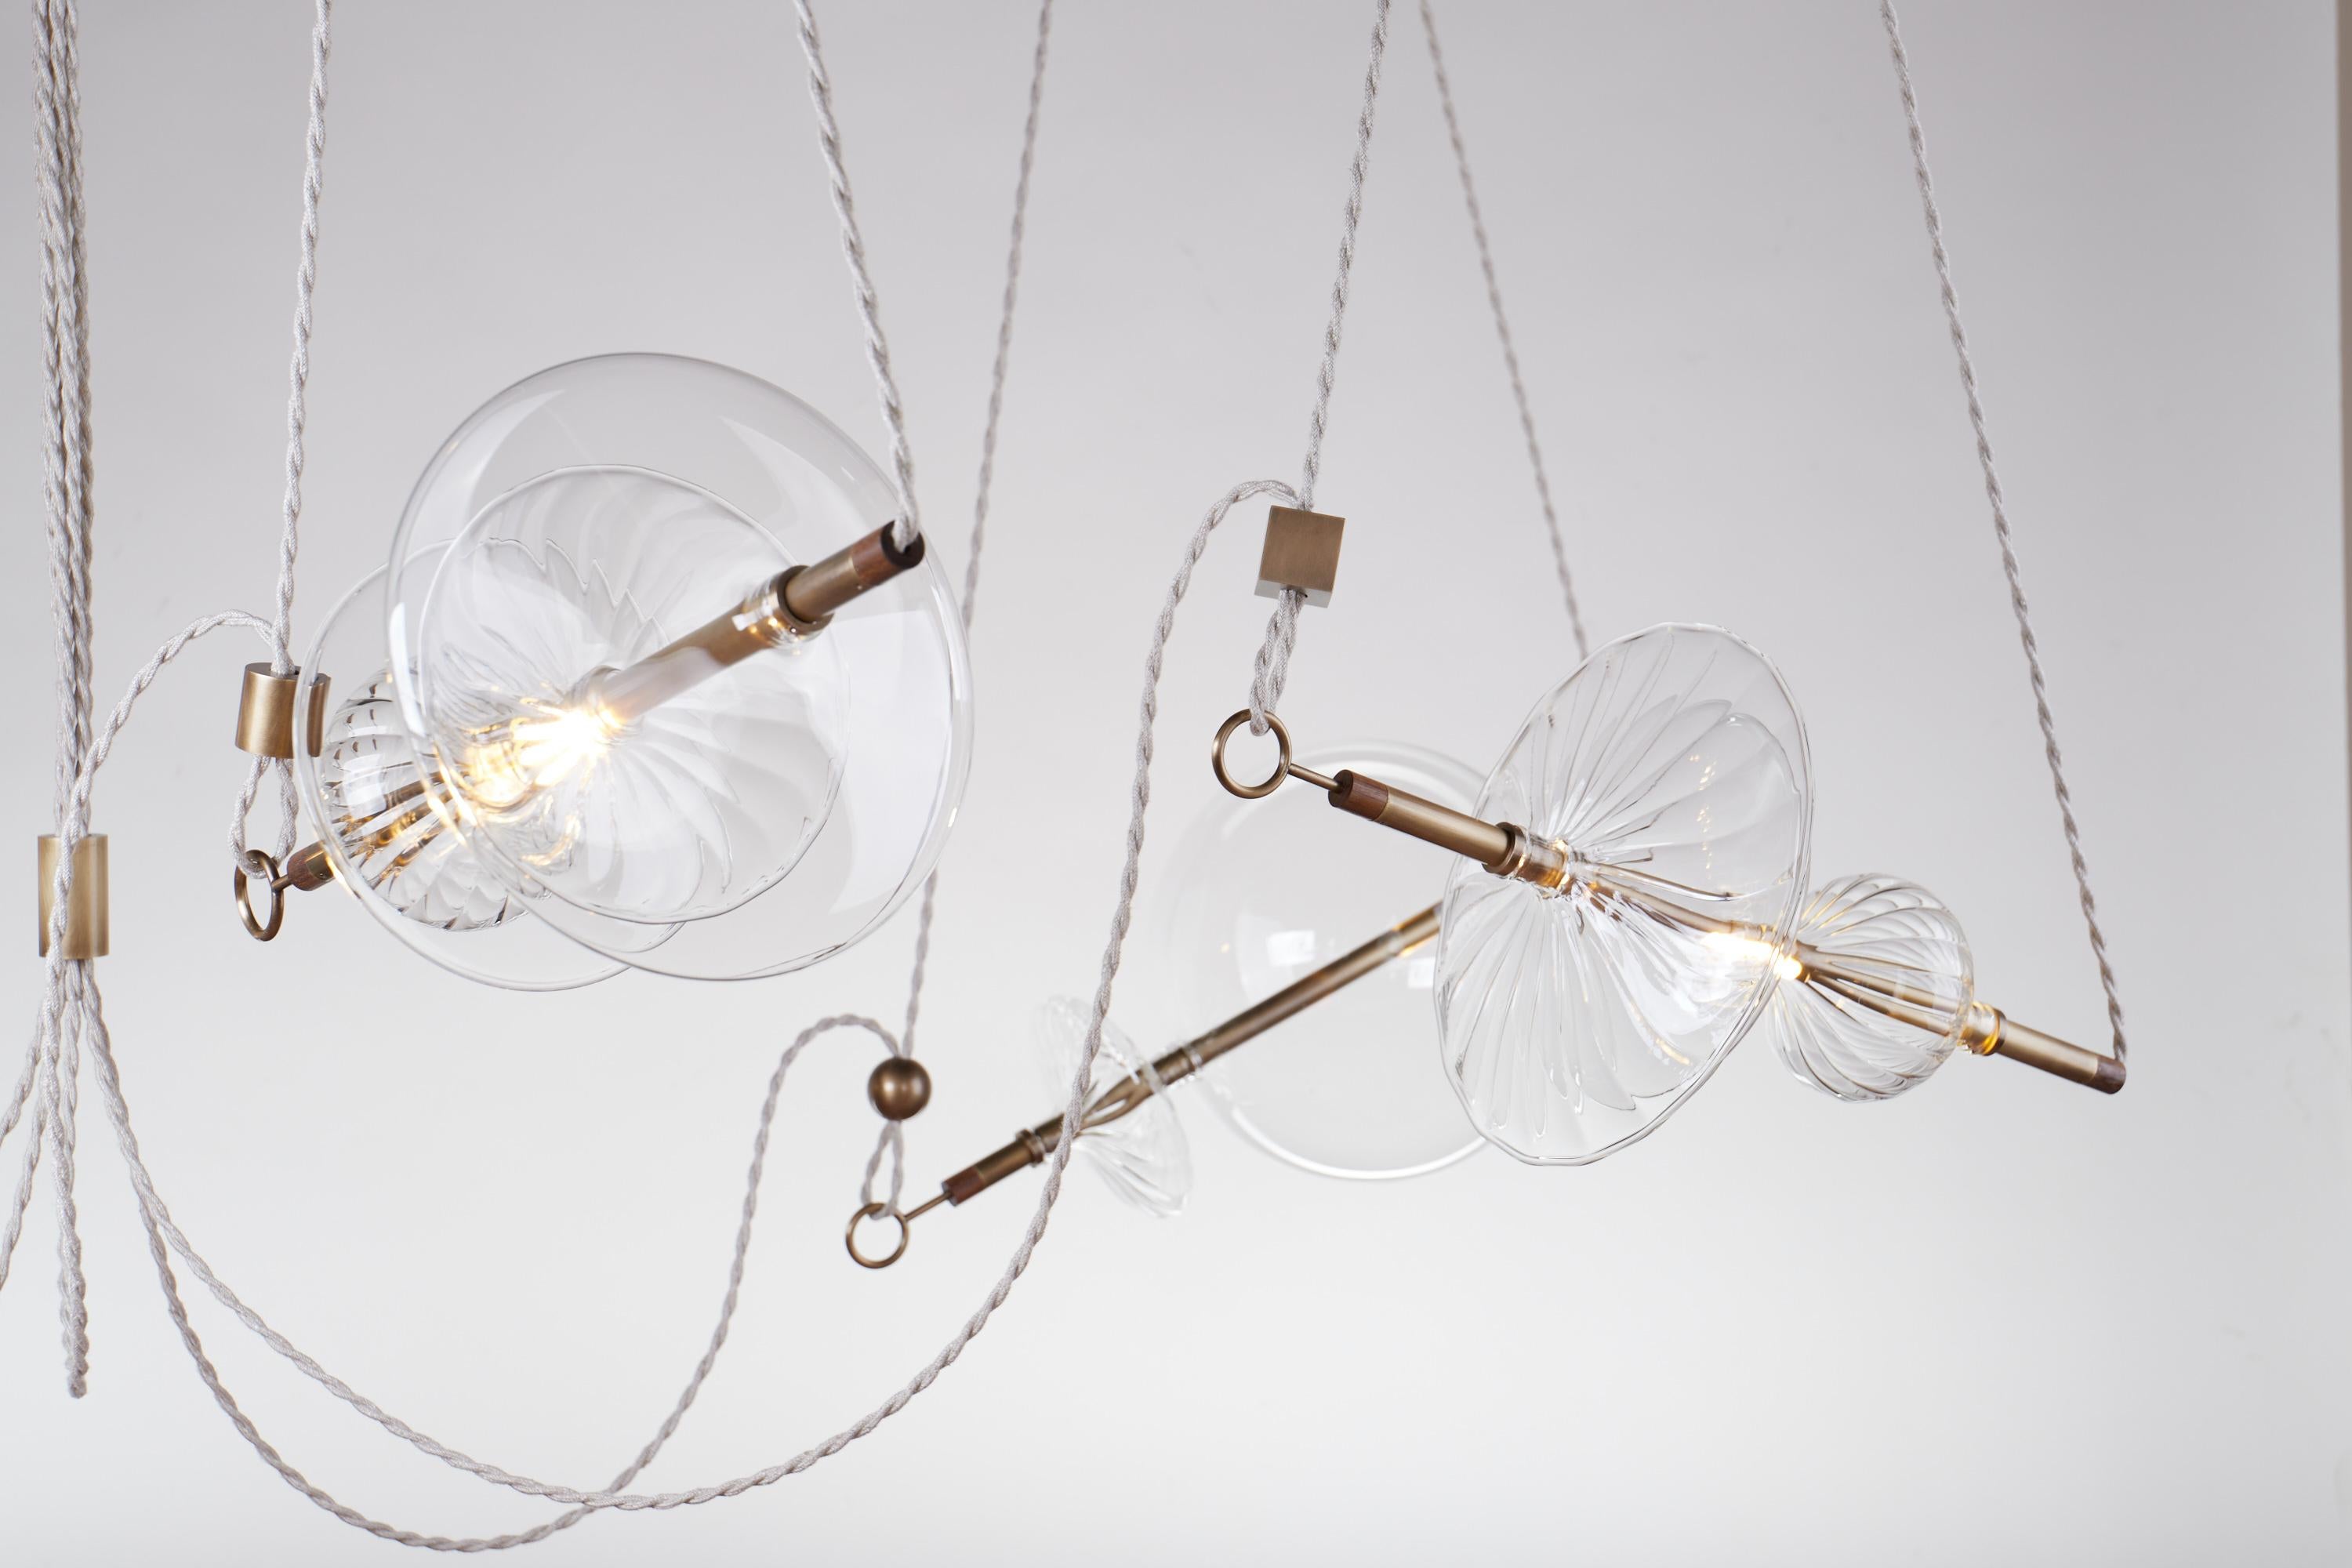 The Trapezi contemporary chandelier is inspired by the idea of a Circus Trapeze artist.

Hand-blown glass in a variety of forms is combined with brass bars and hung by Linen Cords from hub units on the ceiling.

The arrangement of the lights is